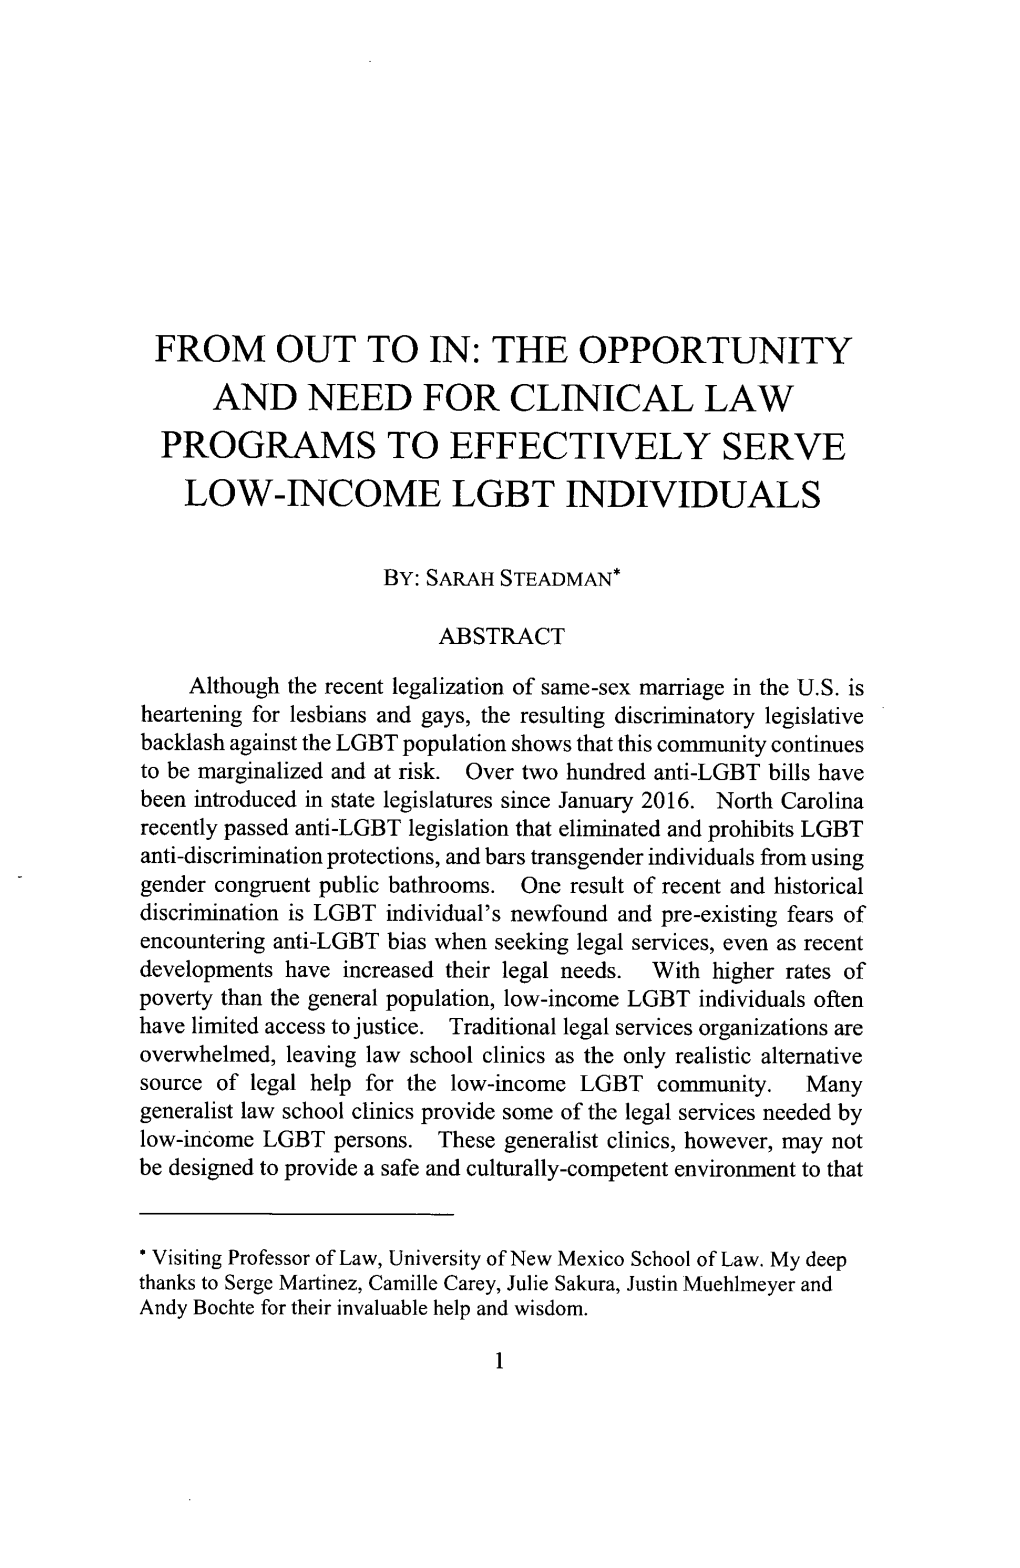 The Opportunity and Need for Clinical Law Programs to Effectively Serve Low-Income Lgbt Individuals